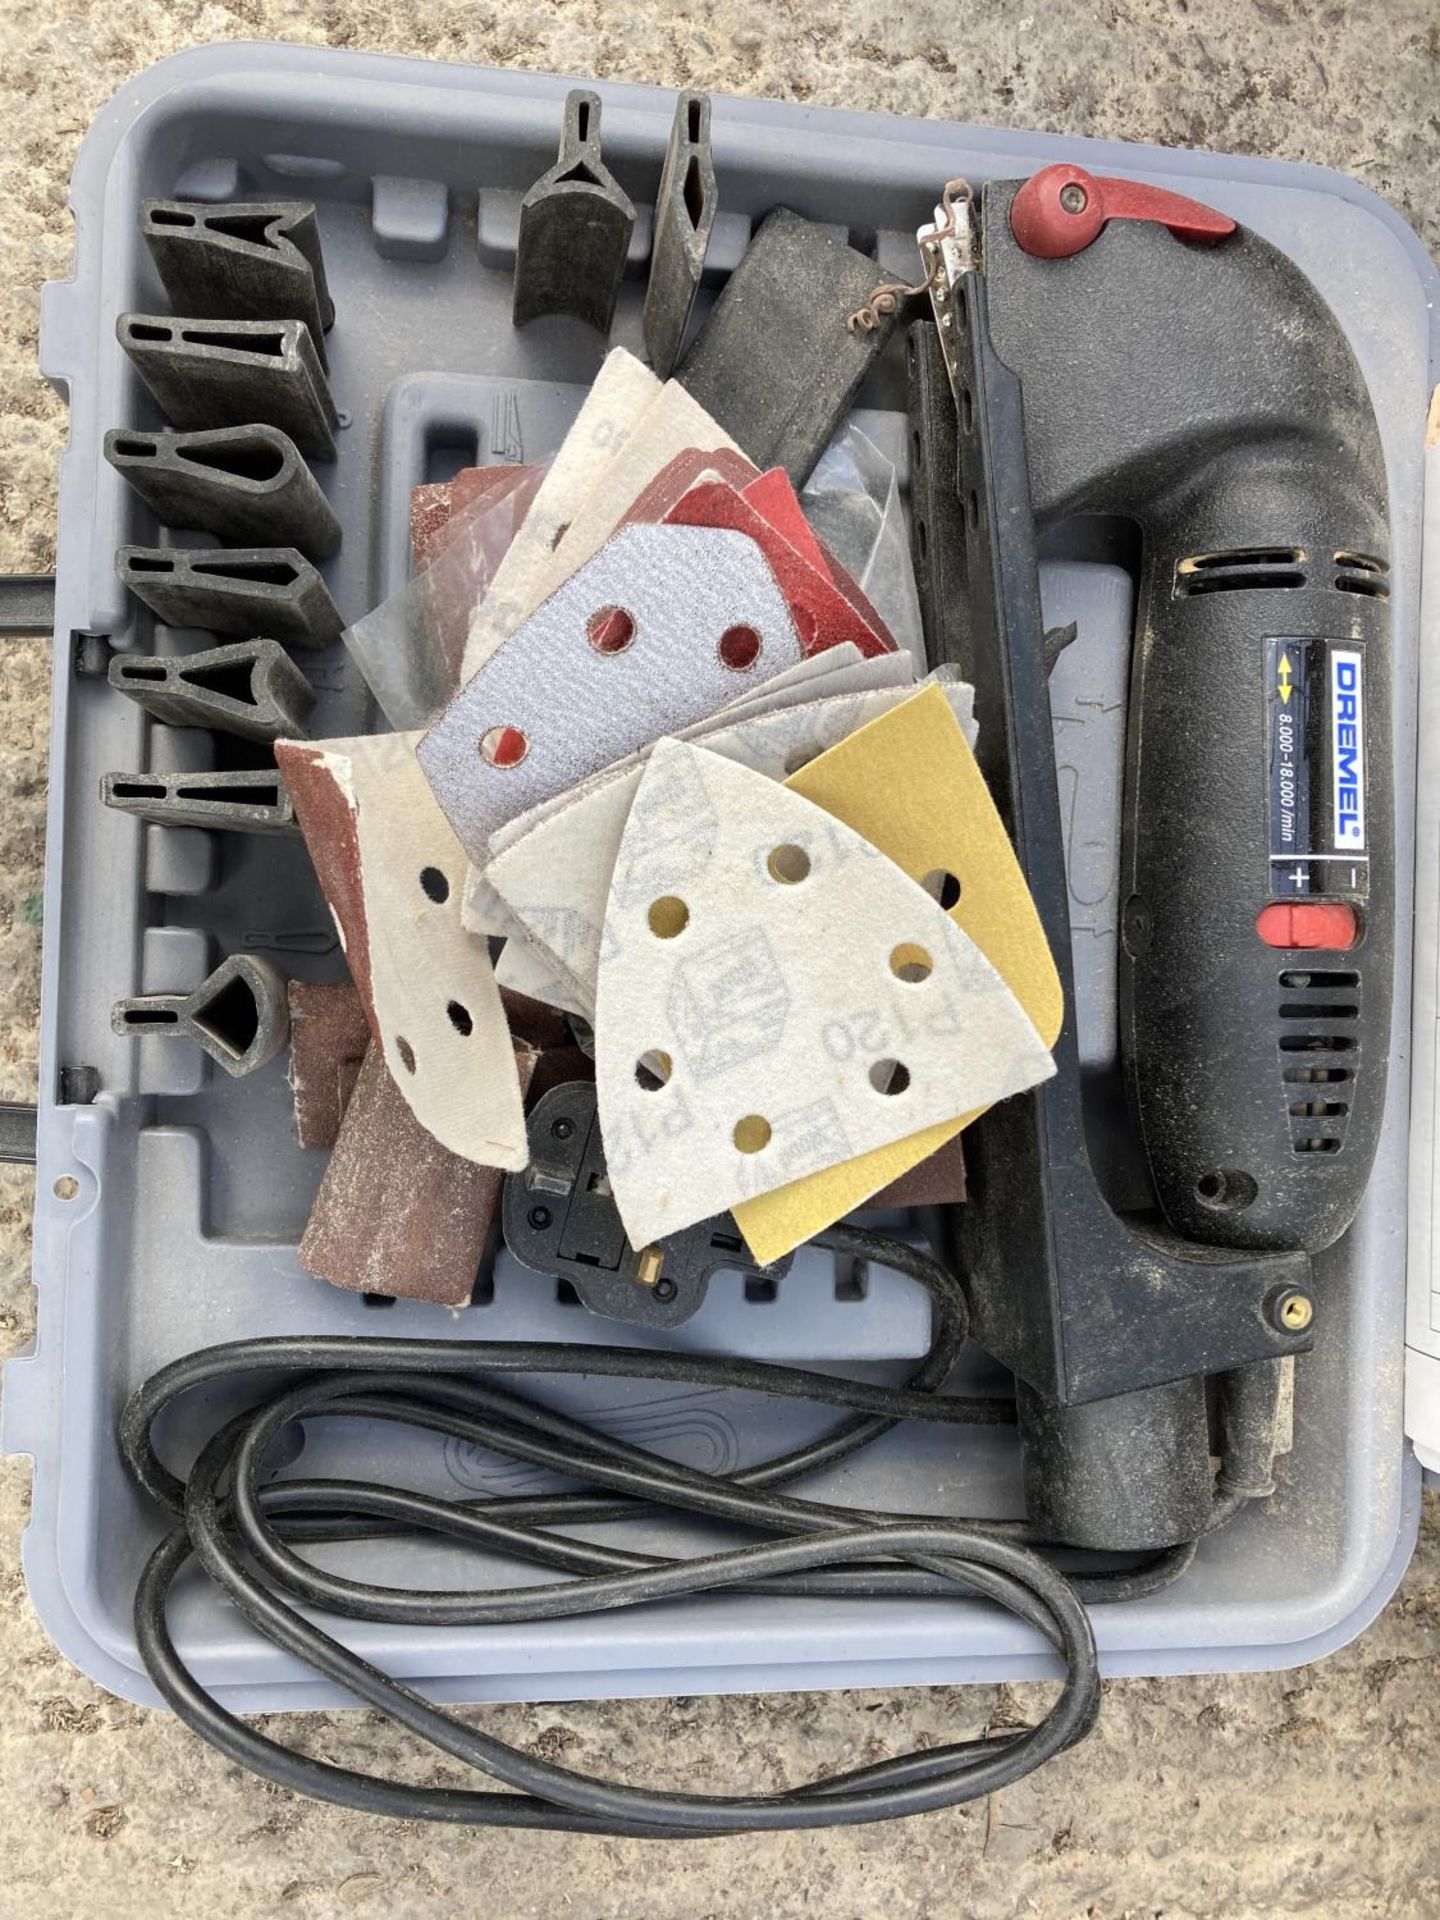 FOUR POWER TOOLS IN CASES TO INCLUDE DREMEL SANDER, PROXXON MICROMOT DRILL, PARKSIDE DRILL, WORKZONE - Image 2 of 5